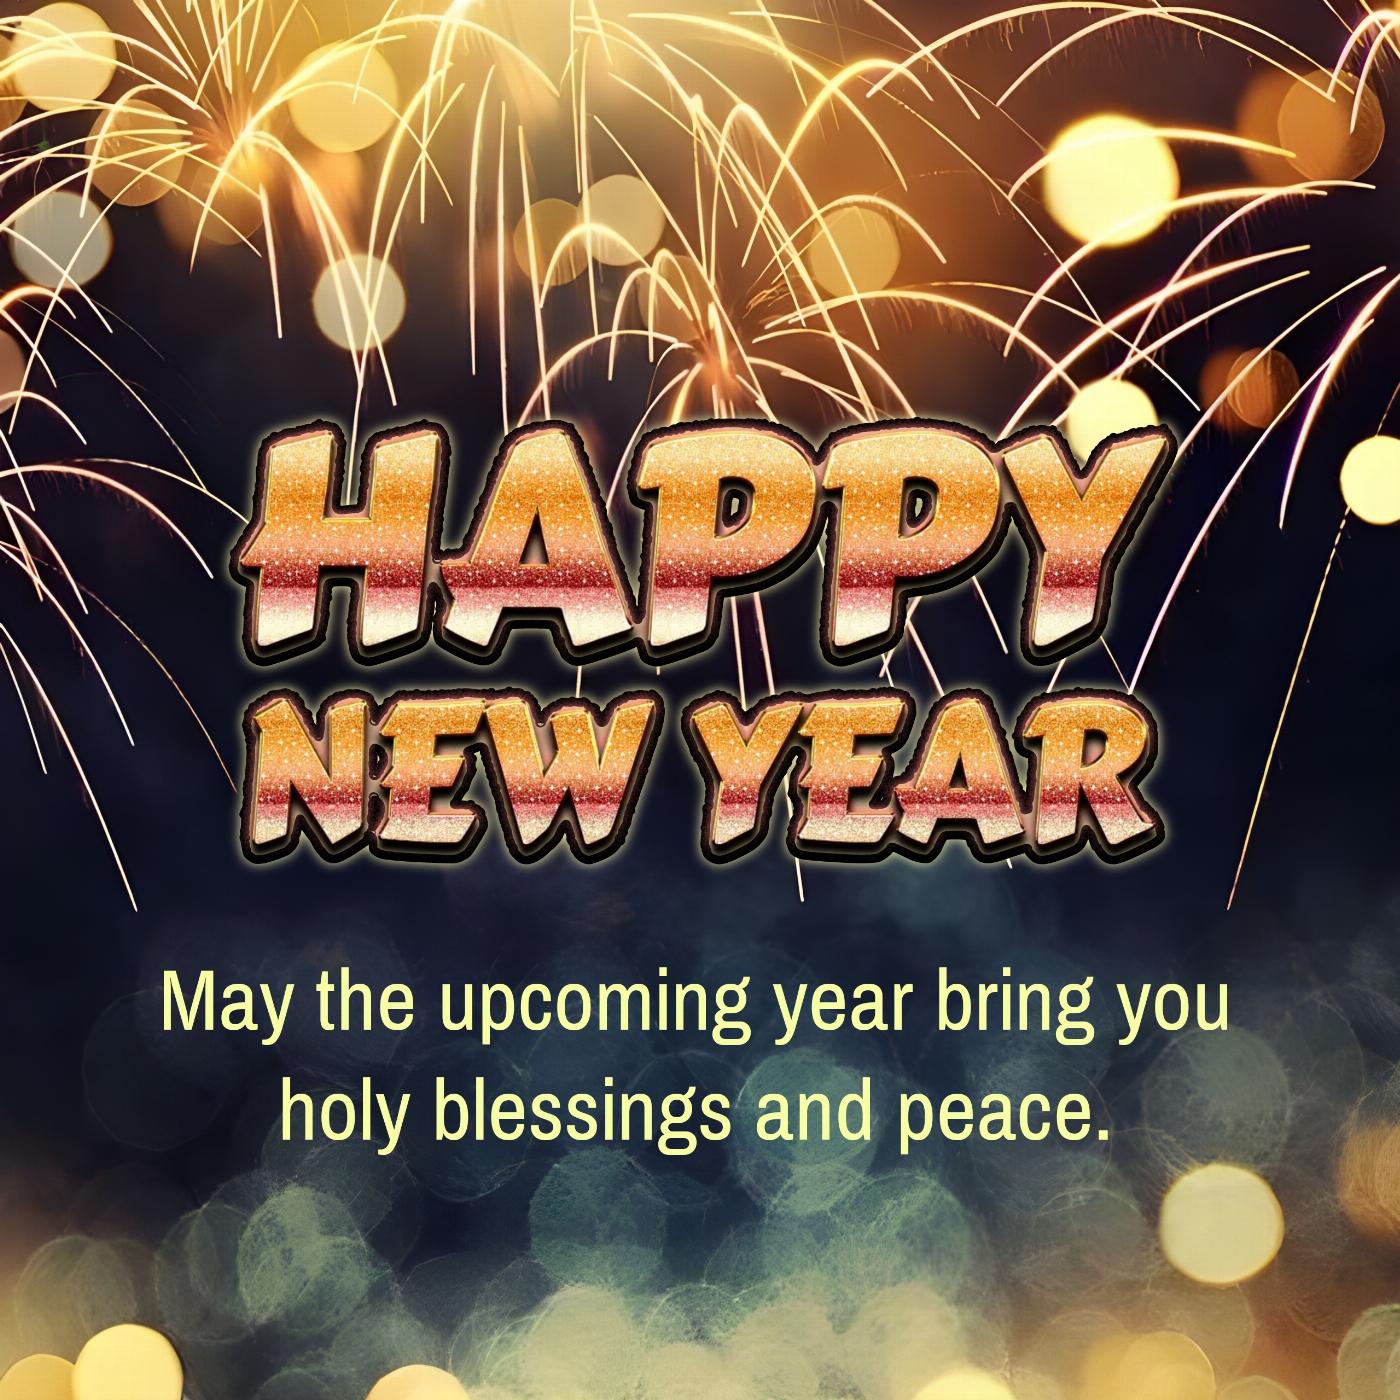 May the upcoming year bring you holy blessings and peace